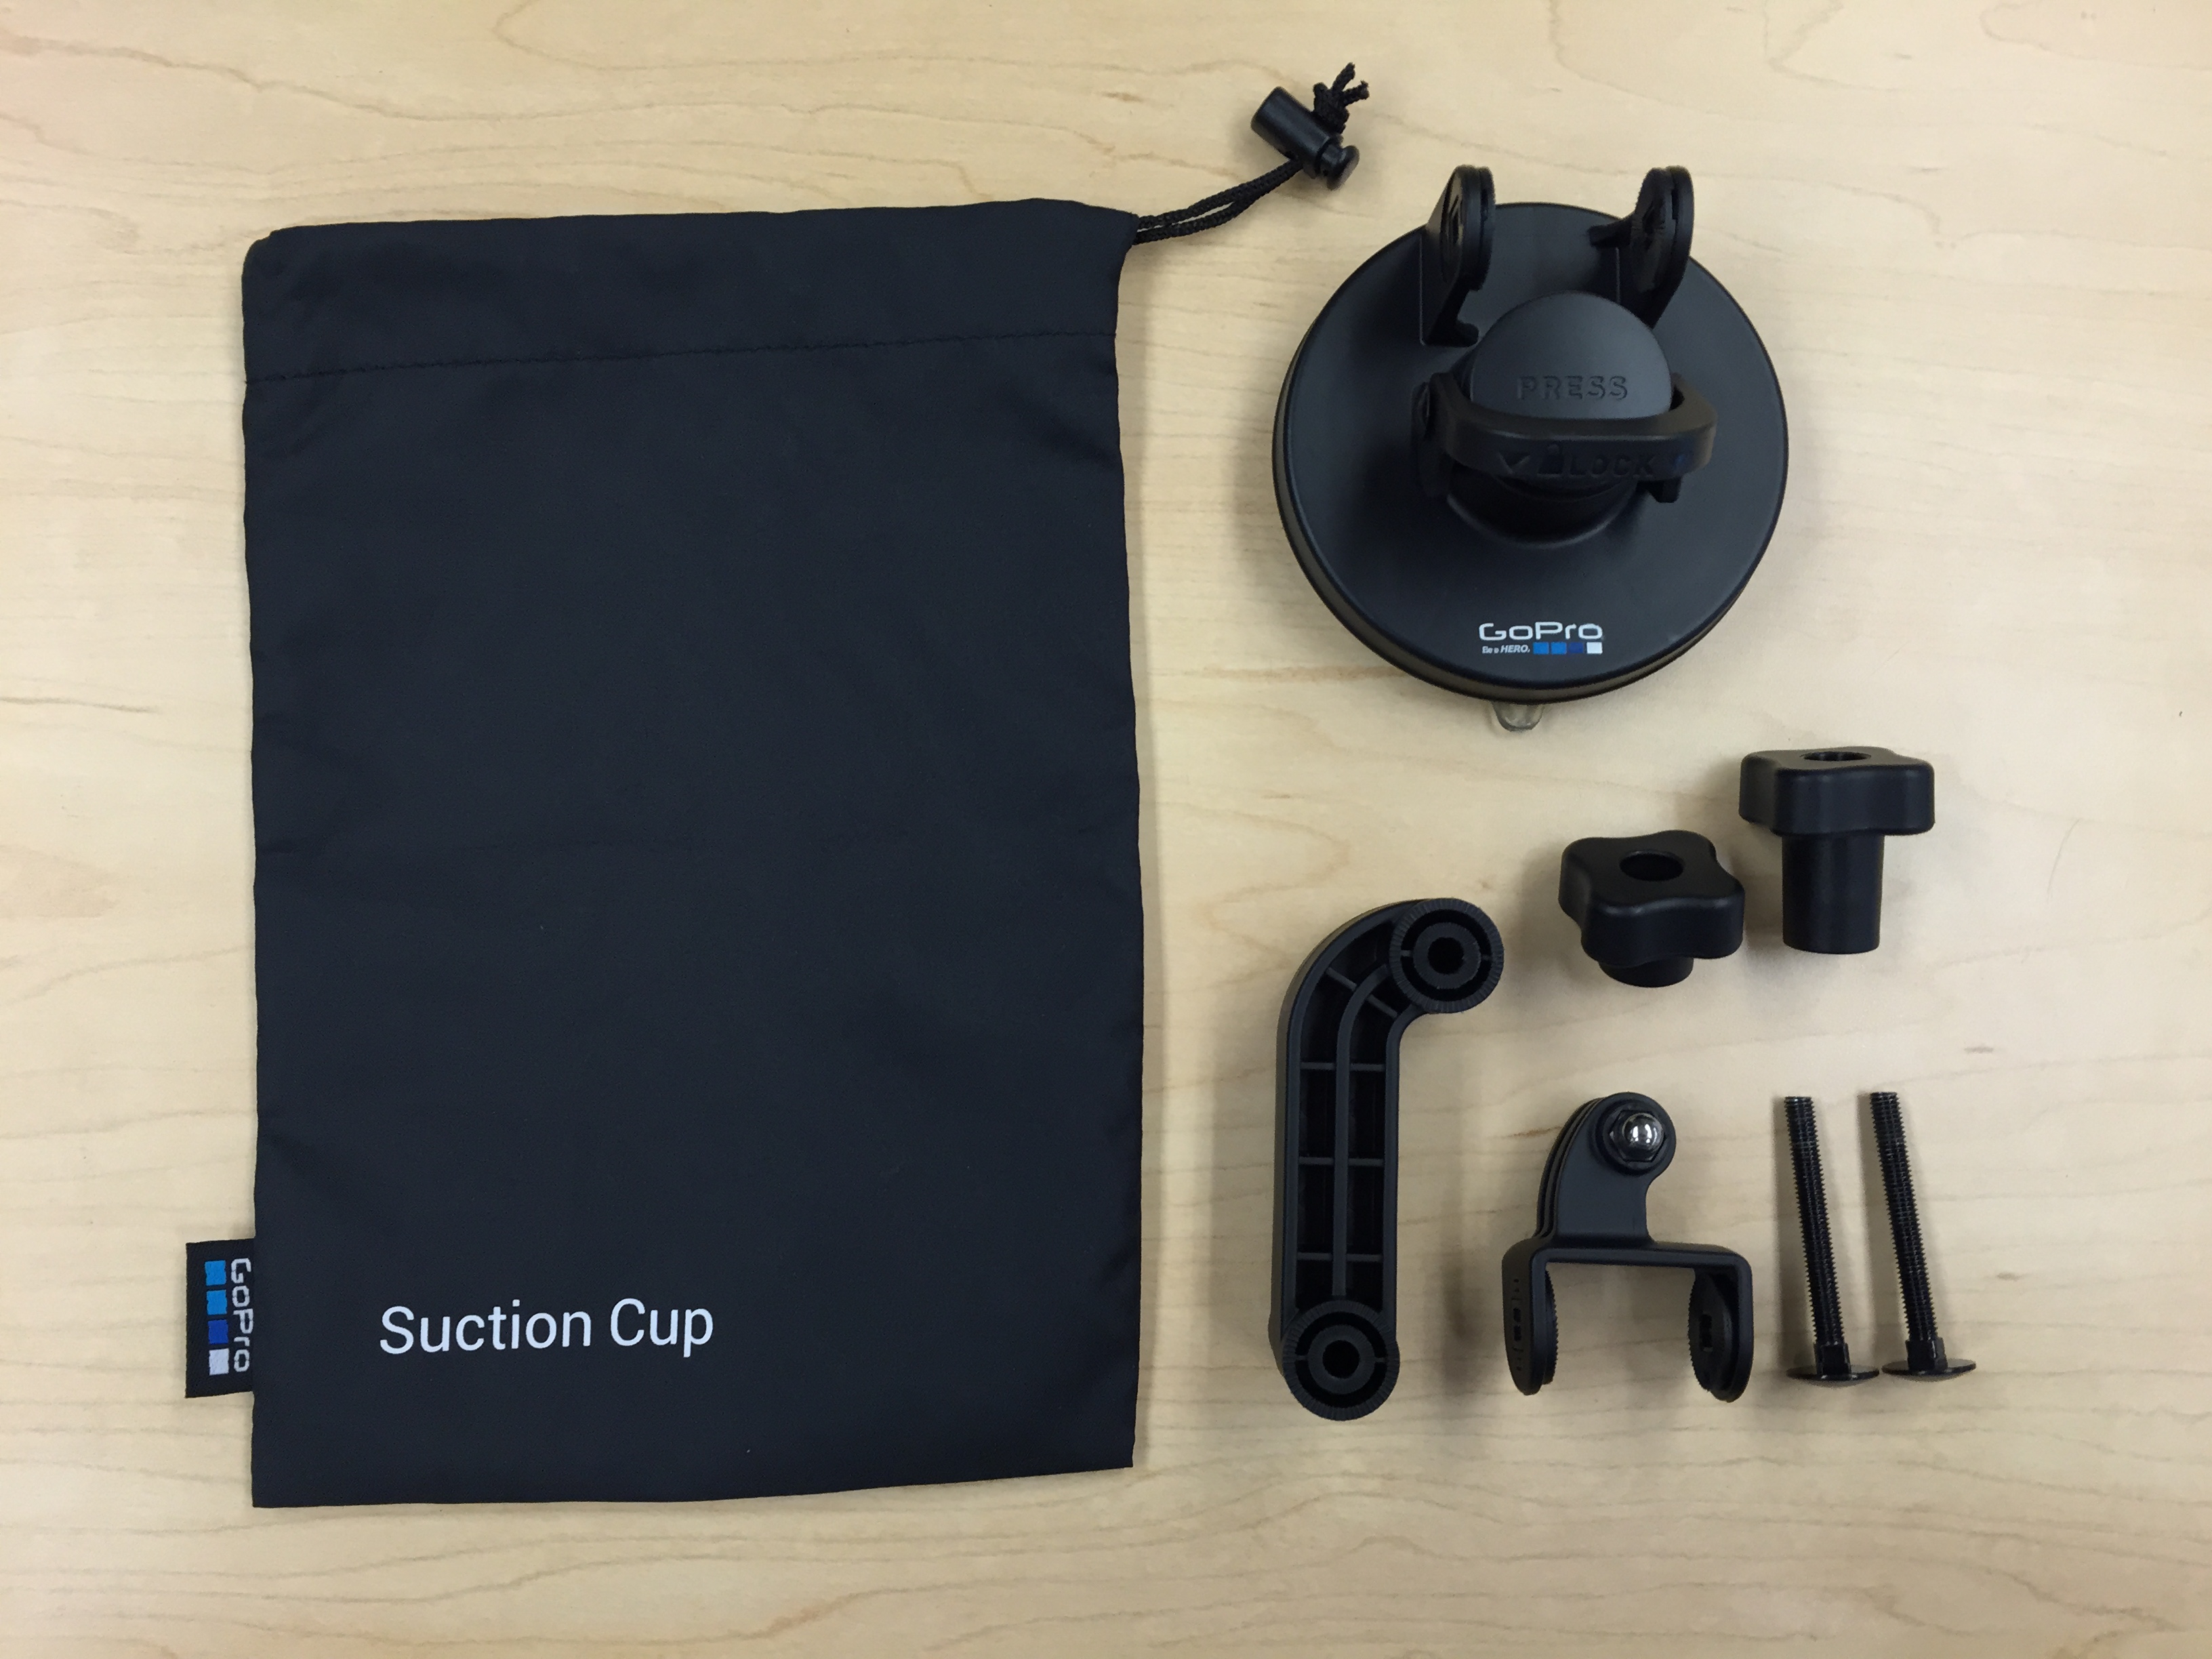 7 GoPro Suction Cup Pieces plus bag disassembled 